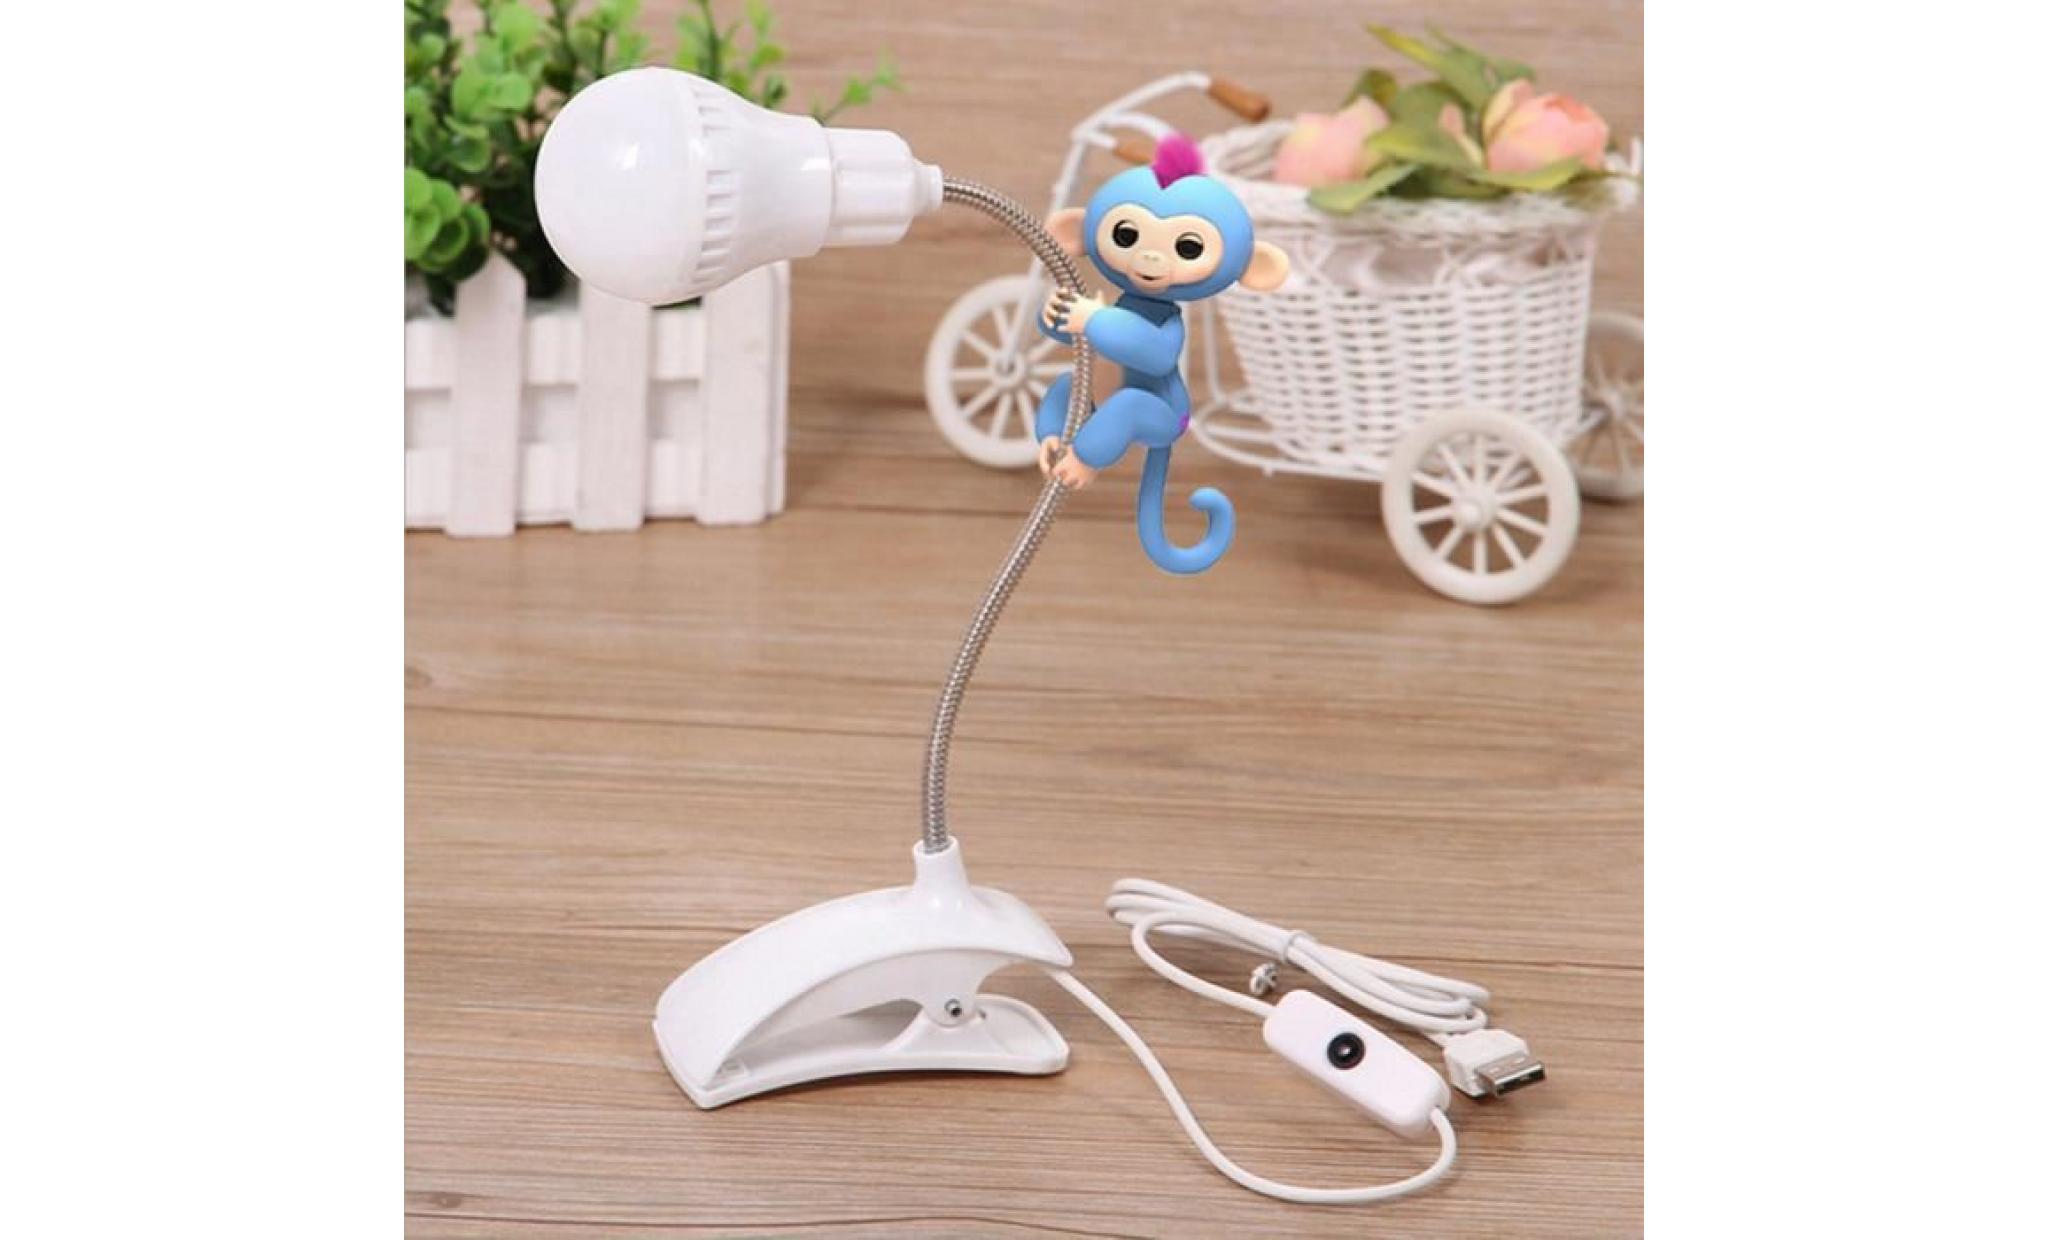 tube led new stand lampe de table usb étudiants étudiants lampe de lecture table desk lamp light wh #pa 809 pas cher